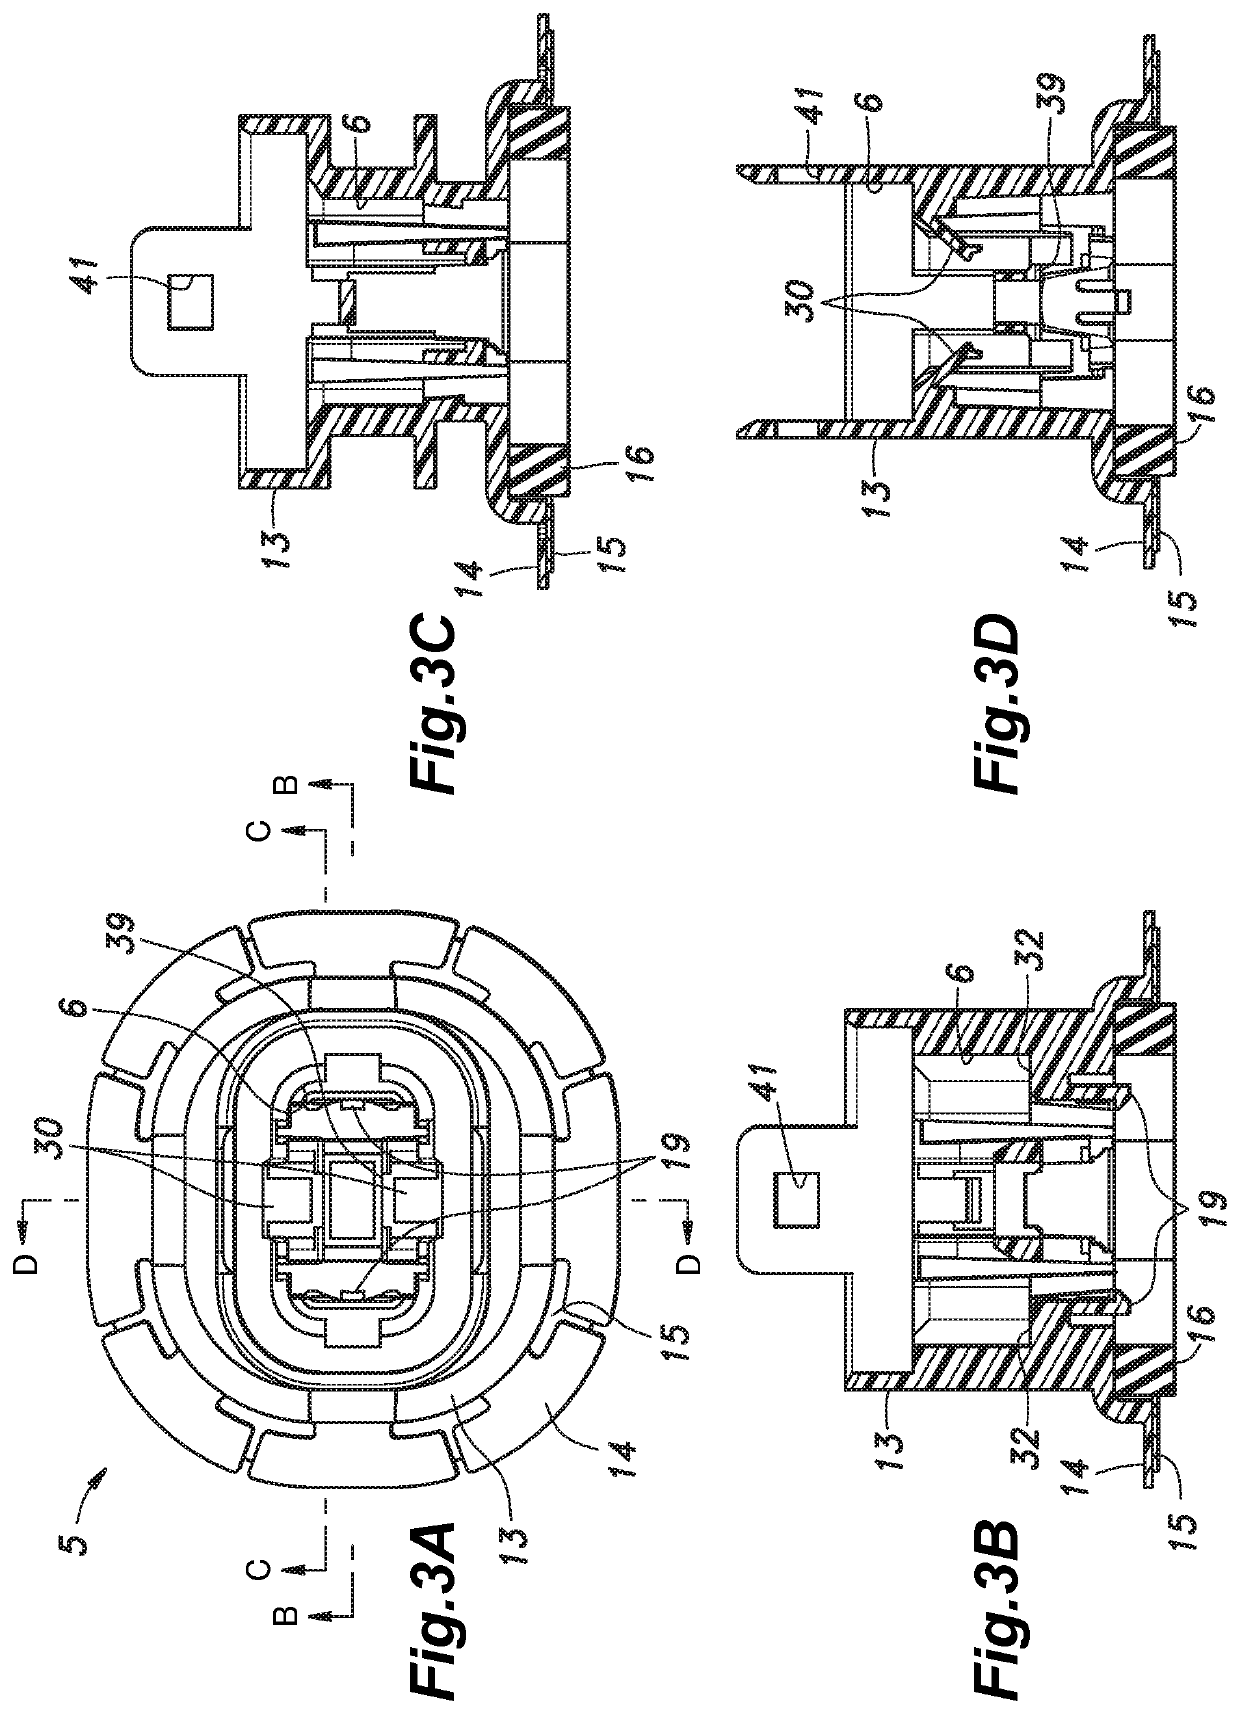 Sensor assembly and mounting method therefor